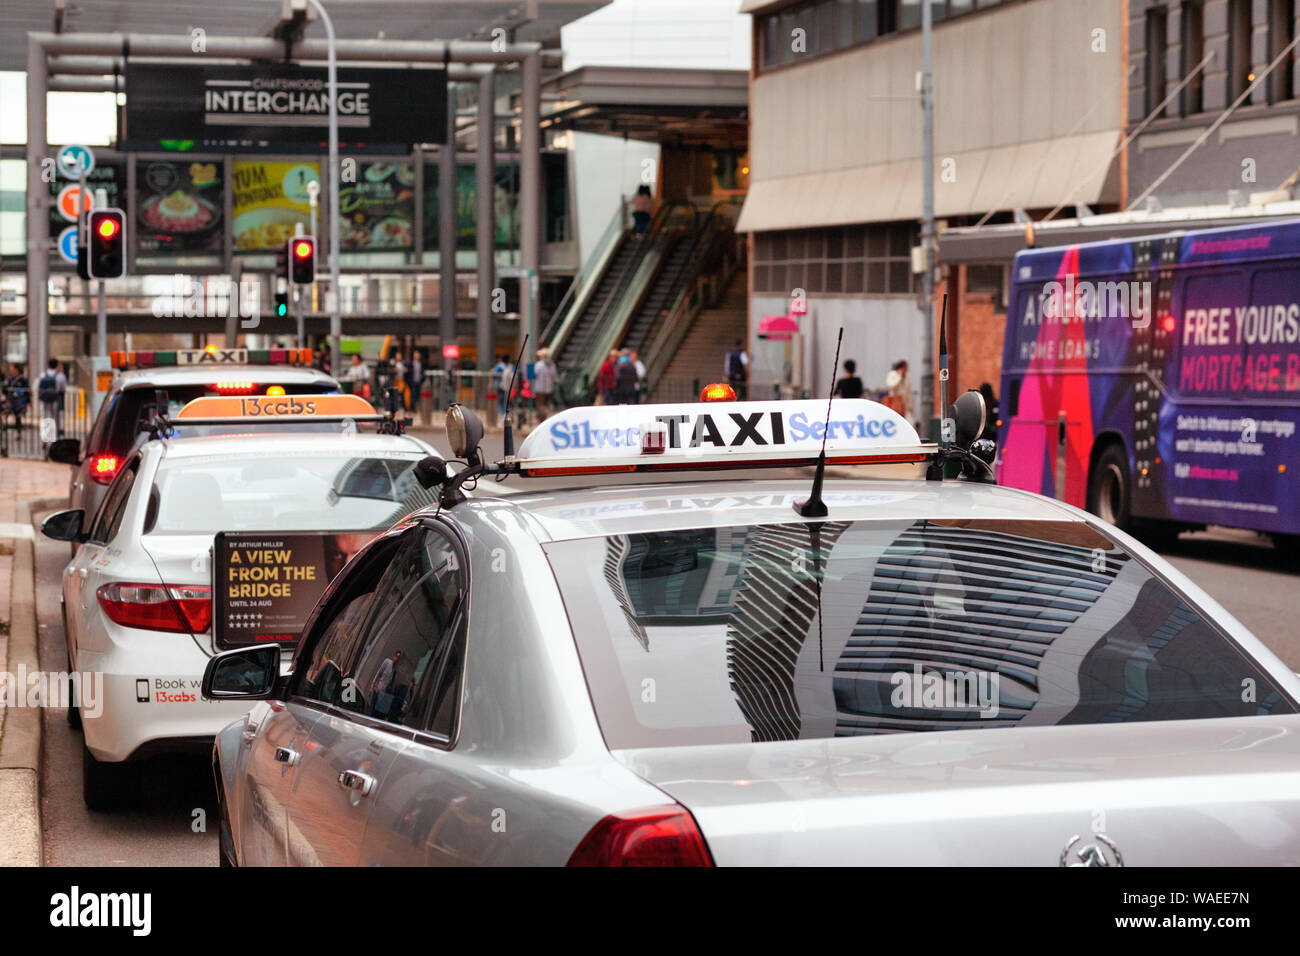 Sydney, NSW / Australia - July 26 2019: Taxi rank in front of Sydney Metro Train and Bus Station at popular Sydney shopping and dining spot Stock Photo